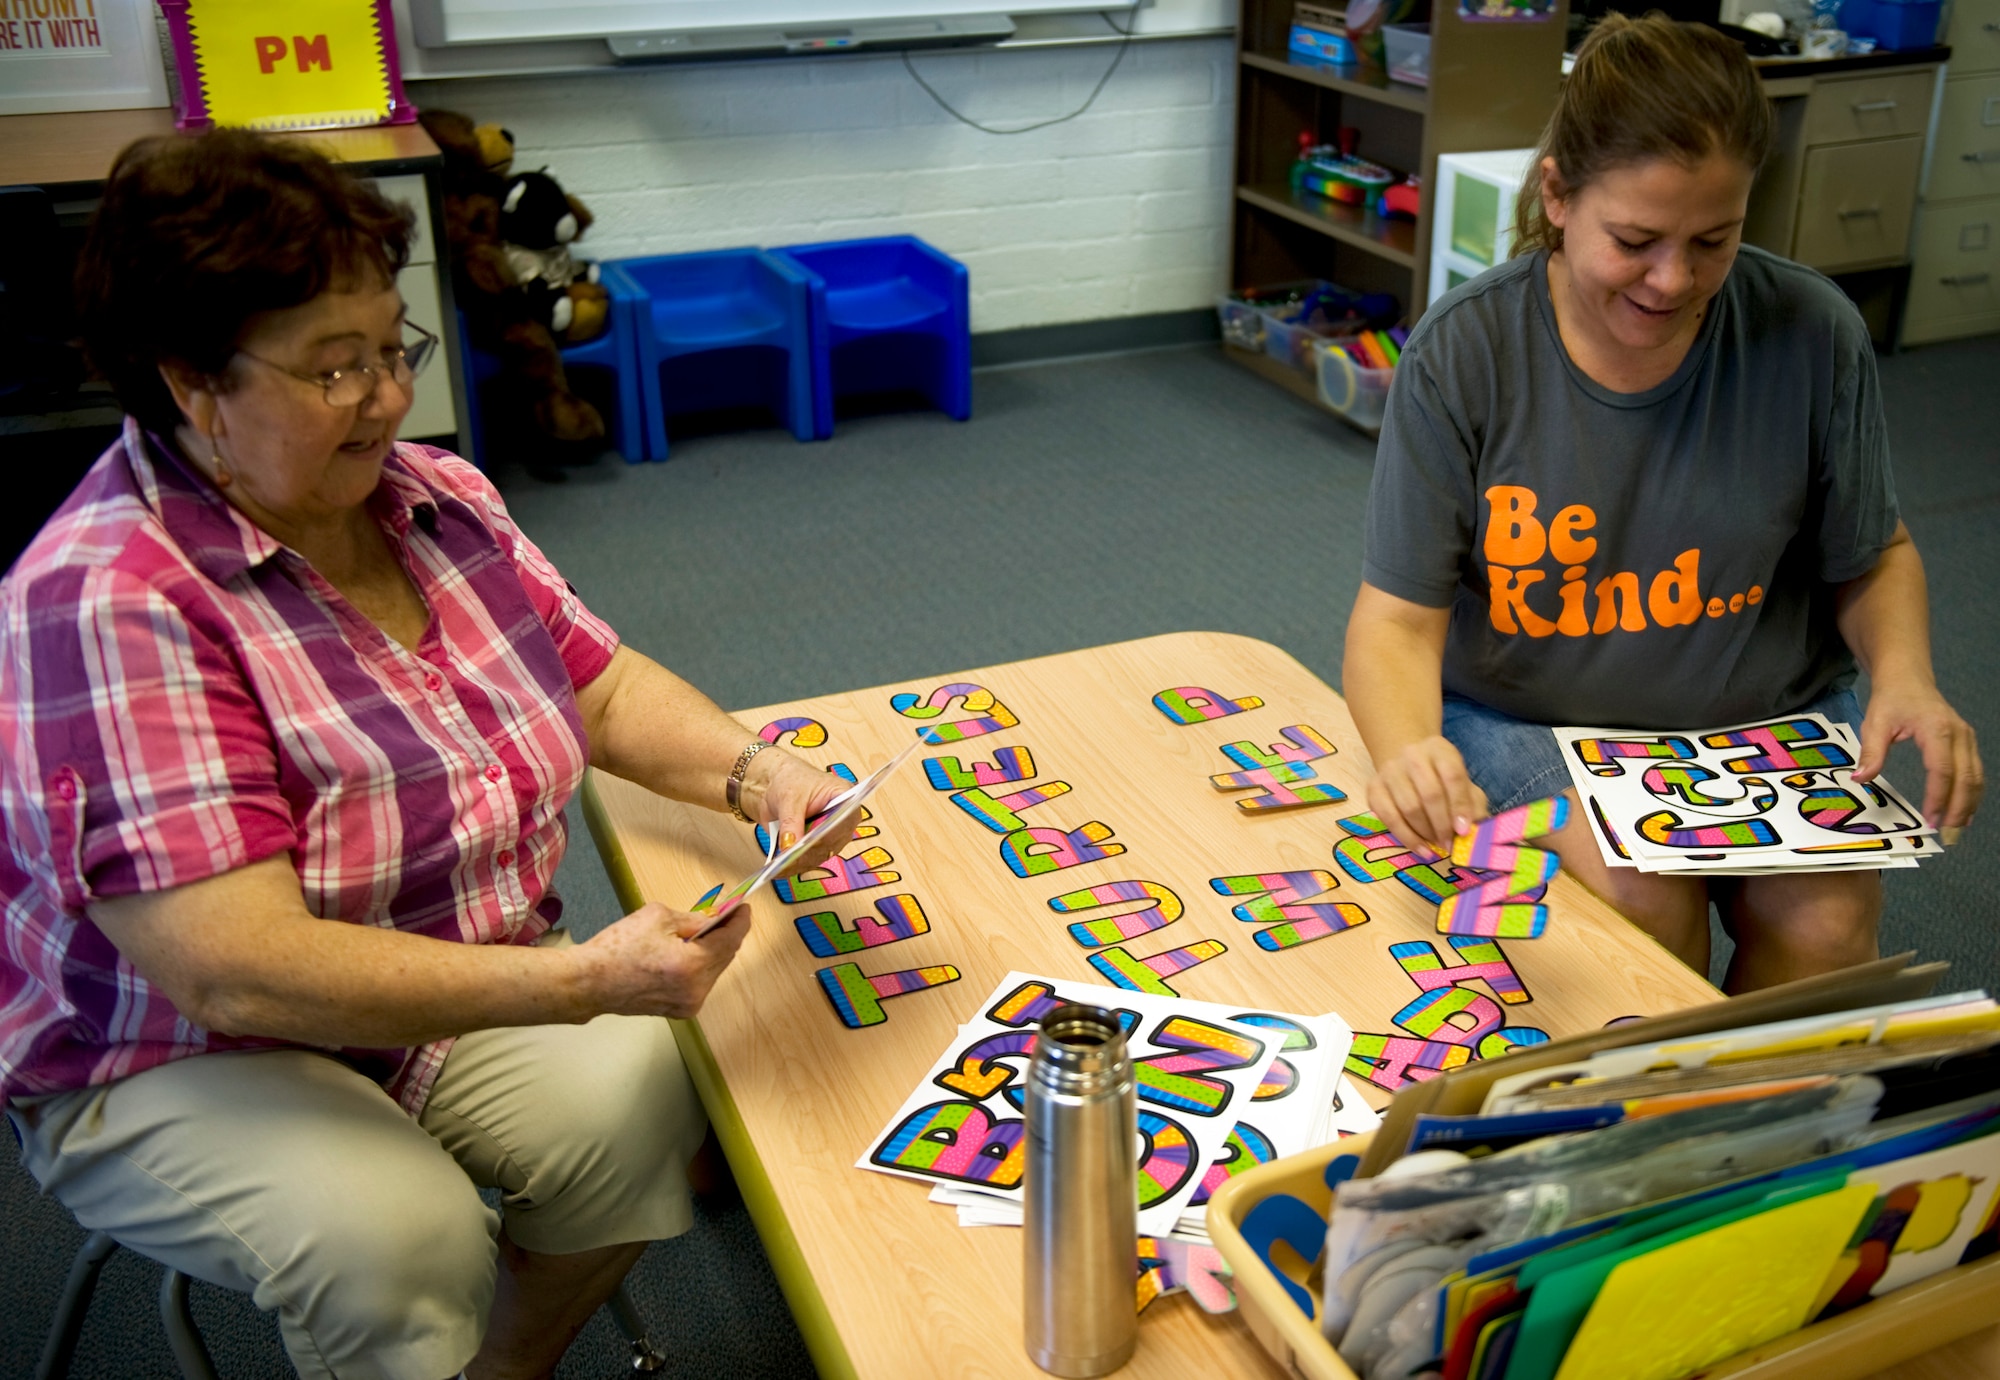 Dominga Romero (left), special program teacher assistant, and Terri Gravnitz (right), early childhood special education teacher, organize letters for their classroom at Lomie G. Heard Elementary School on Nellis Air Force Base, Nev., Aug. 21, 2014. Every Wednesday, children in Gravnitz’ class will be recognized for performing acts of kindness and given a classroom incentive as a prize. (U.S. Air Force photo by Airman 1st Class Mikaley Towle)